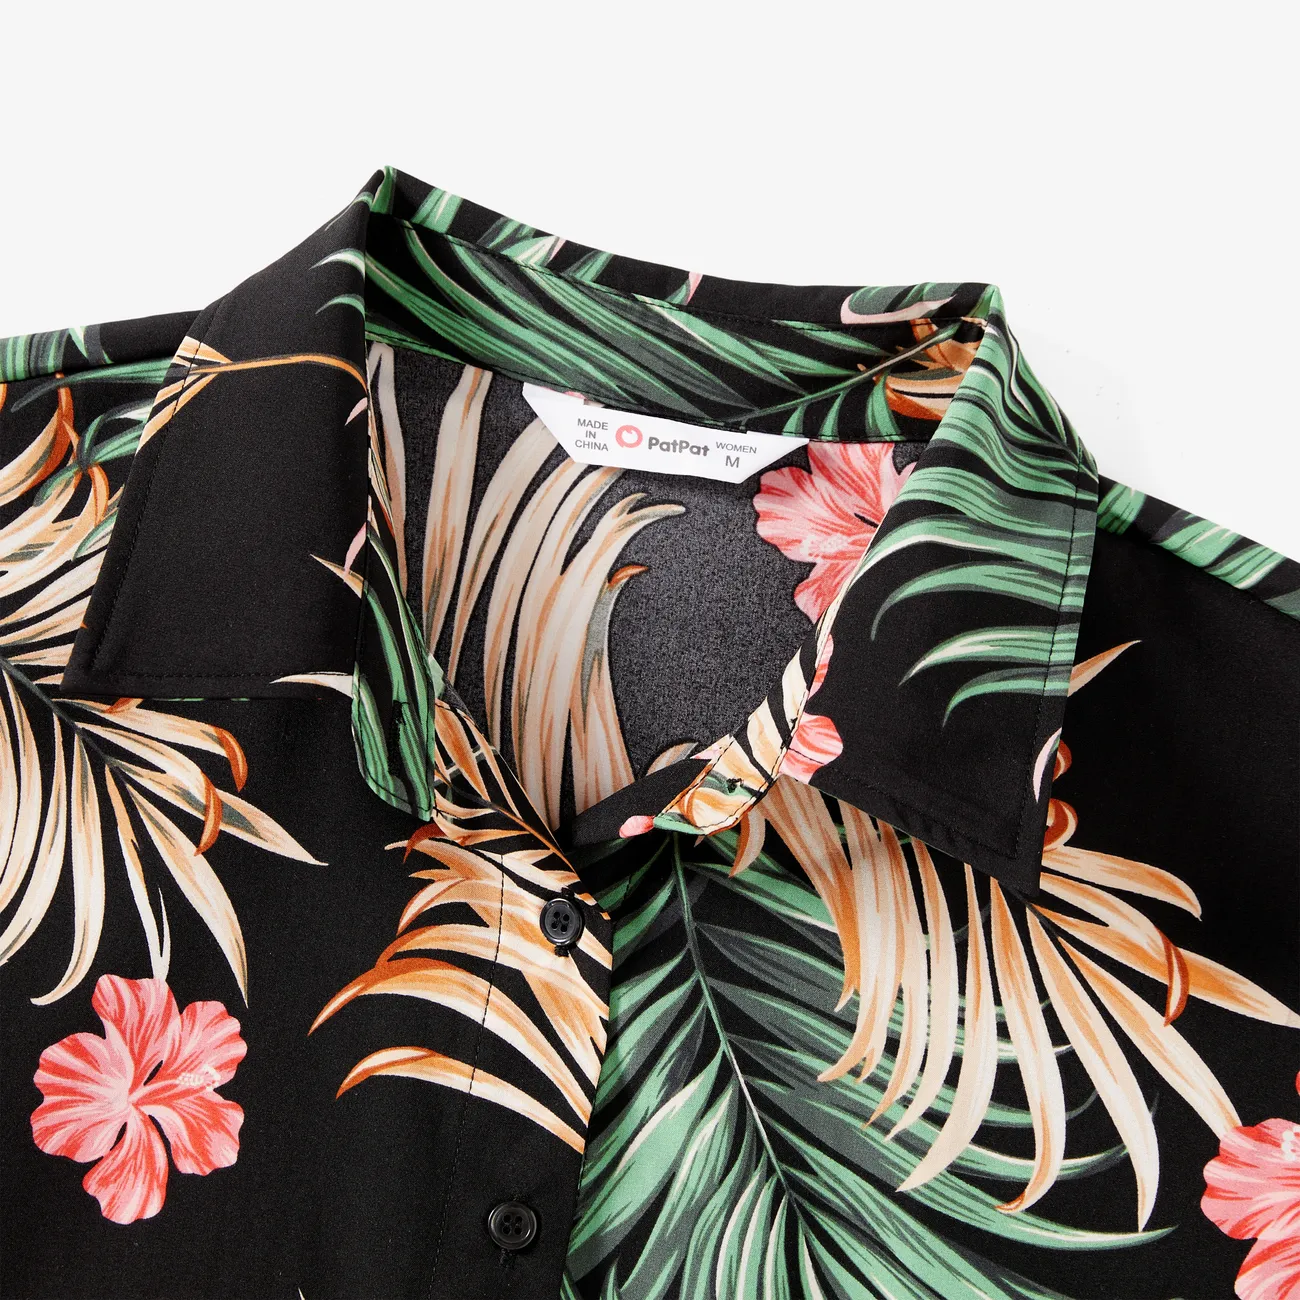 Family Matching Sets Tropical Floral and Leaf Printed Beach Shirt and Drawstring Shorts with Pockets Black big image 1